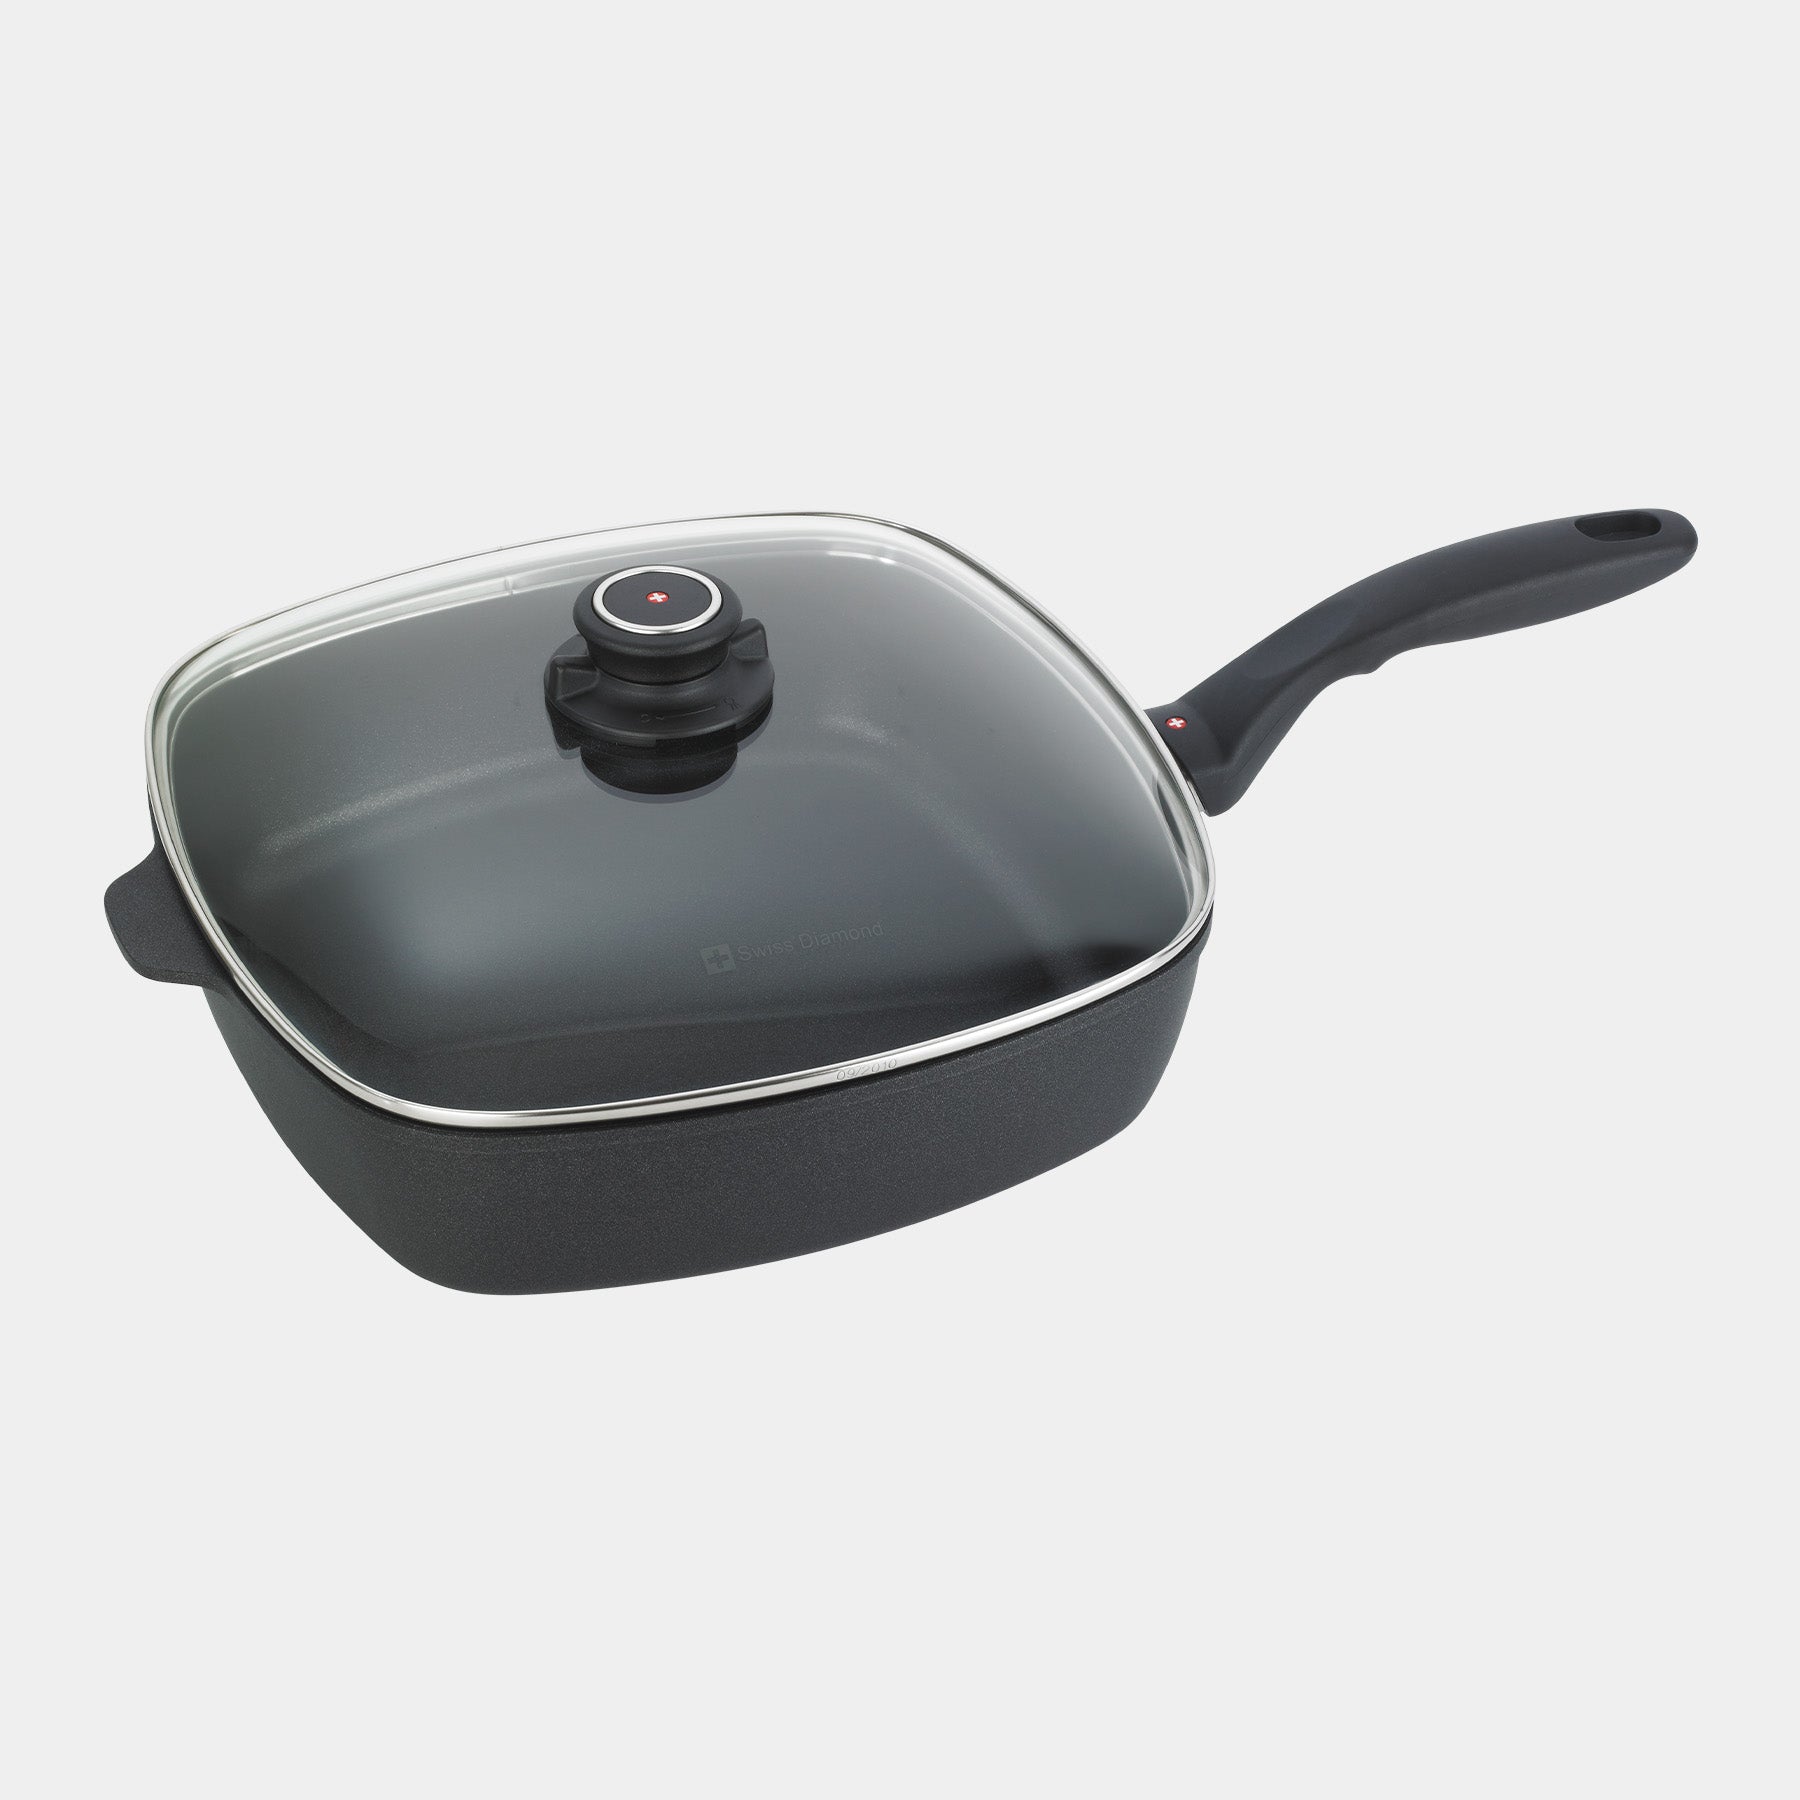 XD Nonstick 11" x 11" Square Saute Pan with Glass Lid - Induction Top View